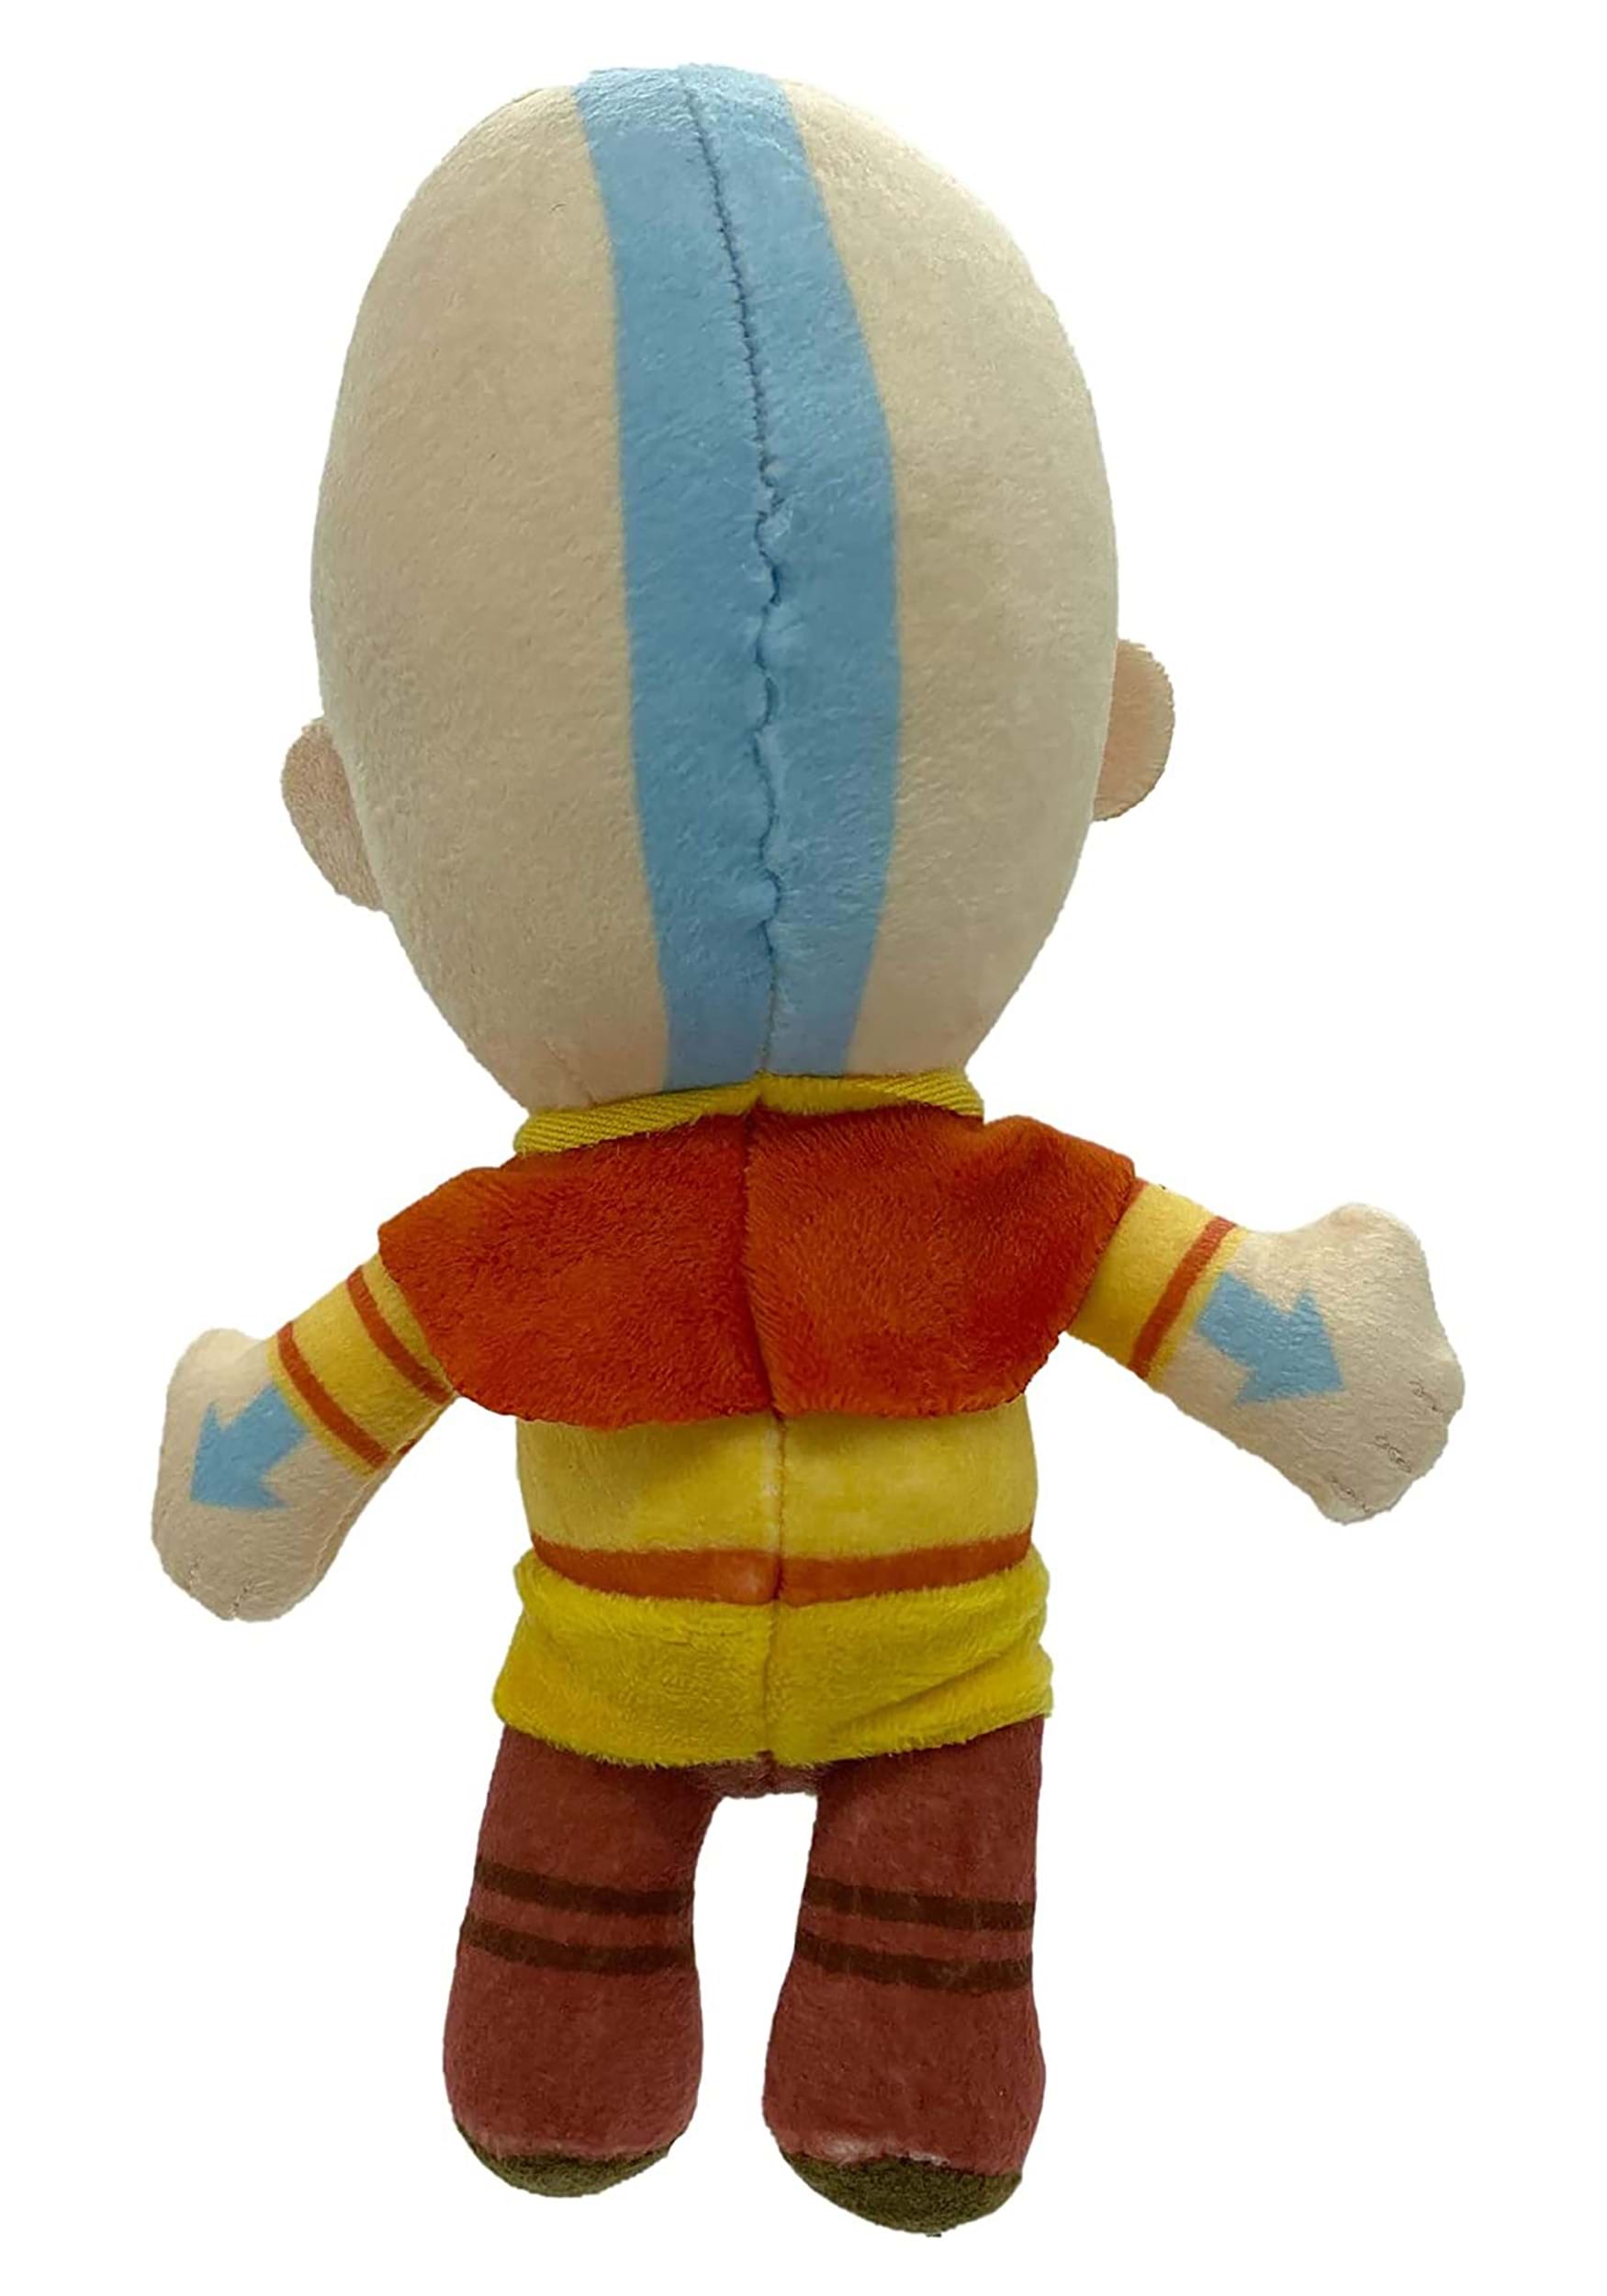 Avatar Aang 7.5 Inch Plush , The Last Airbender Plush Toys